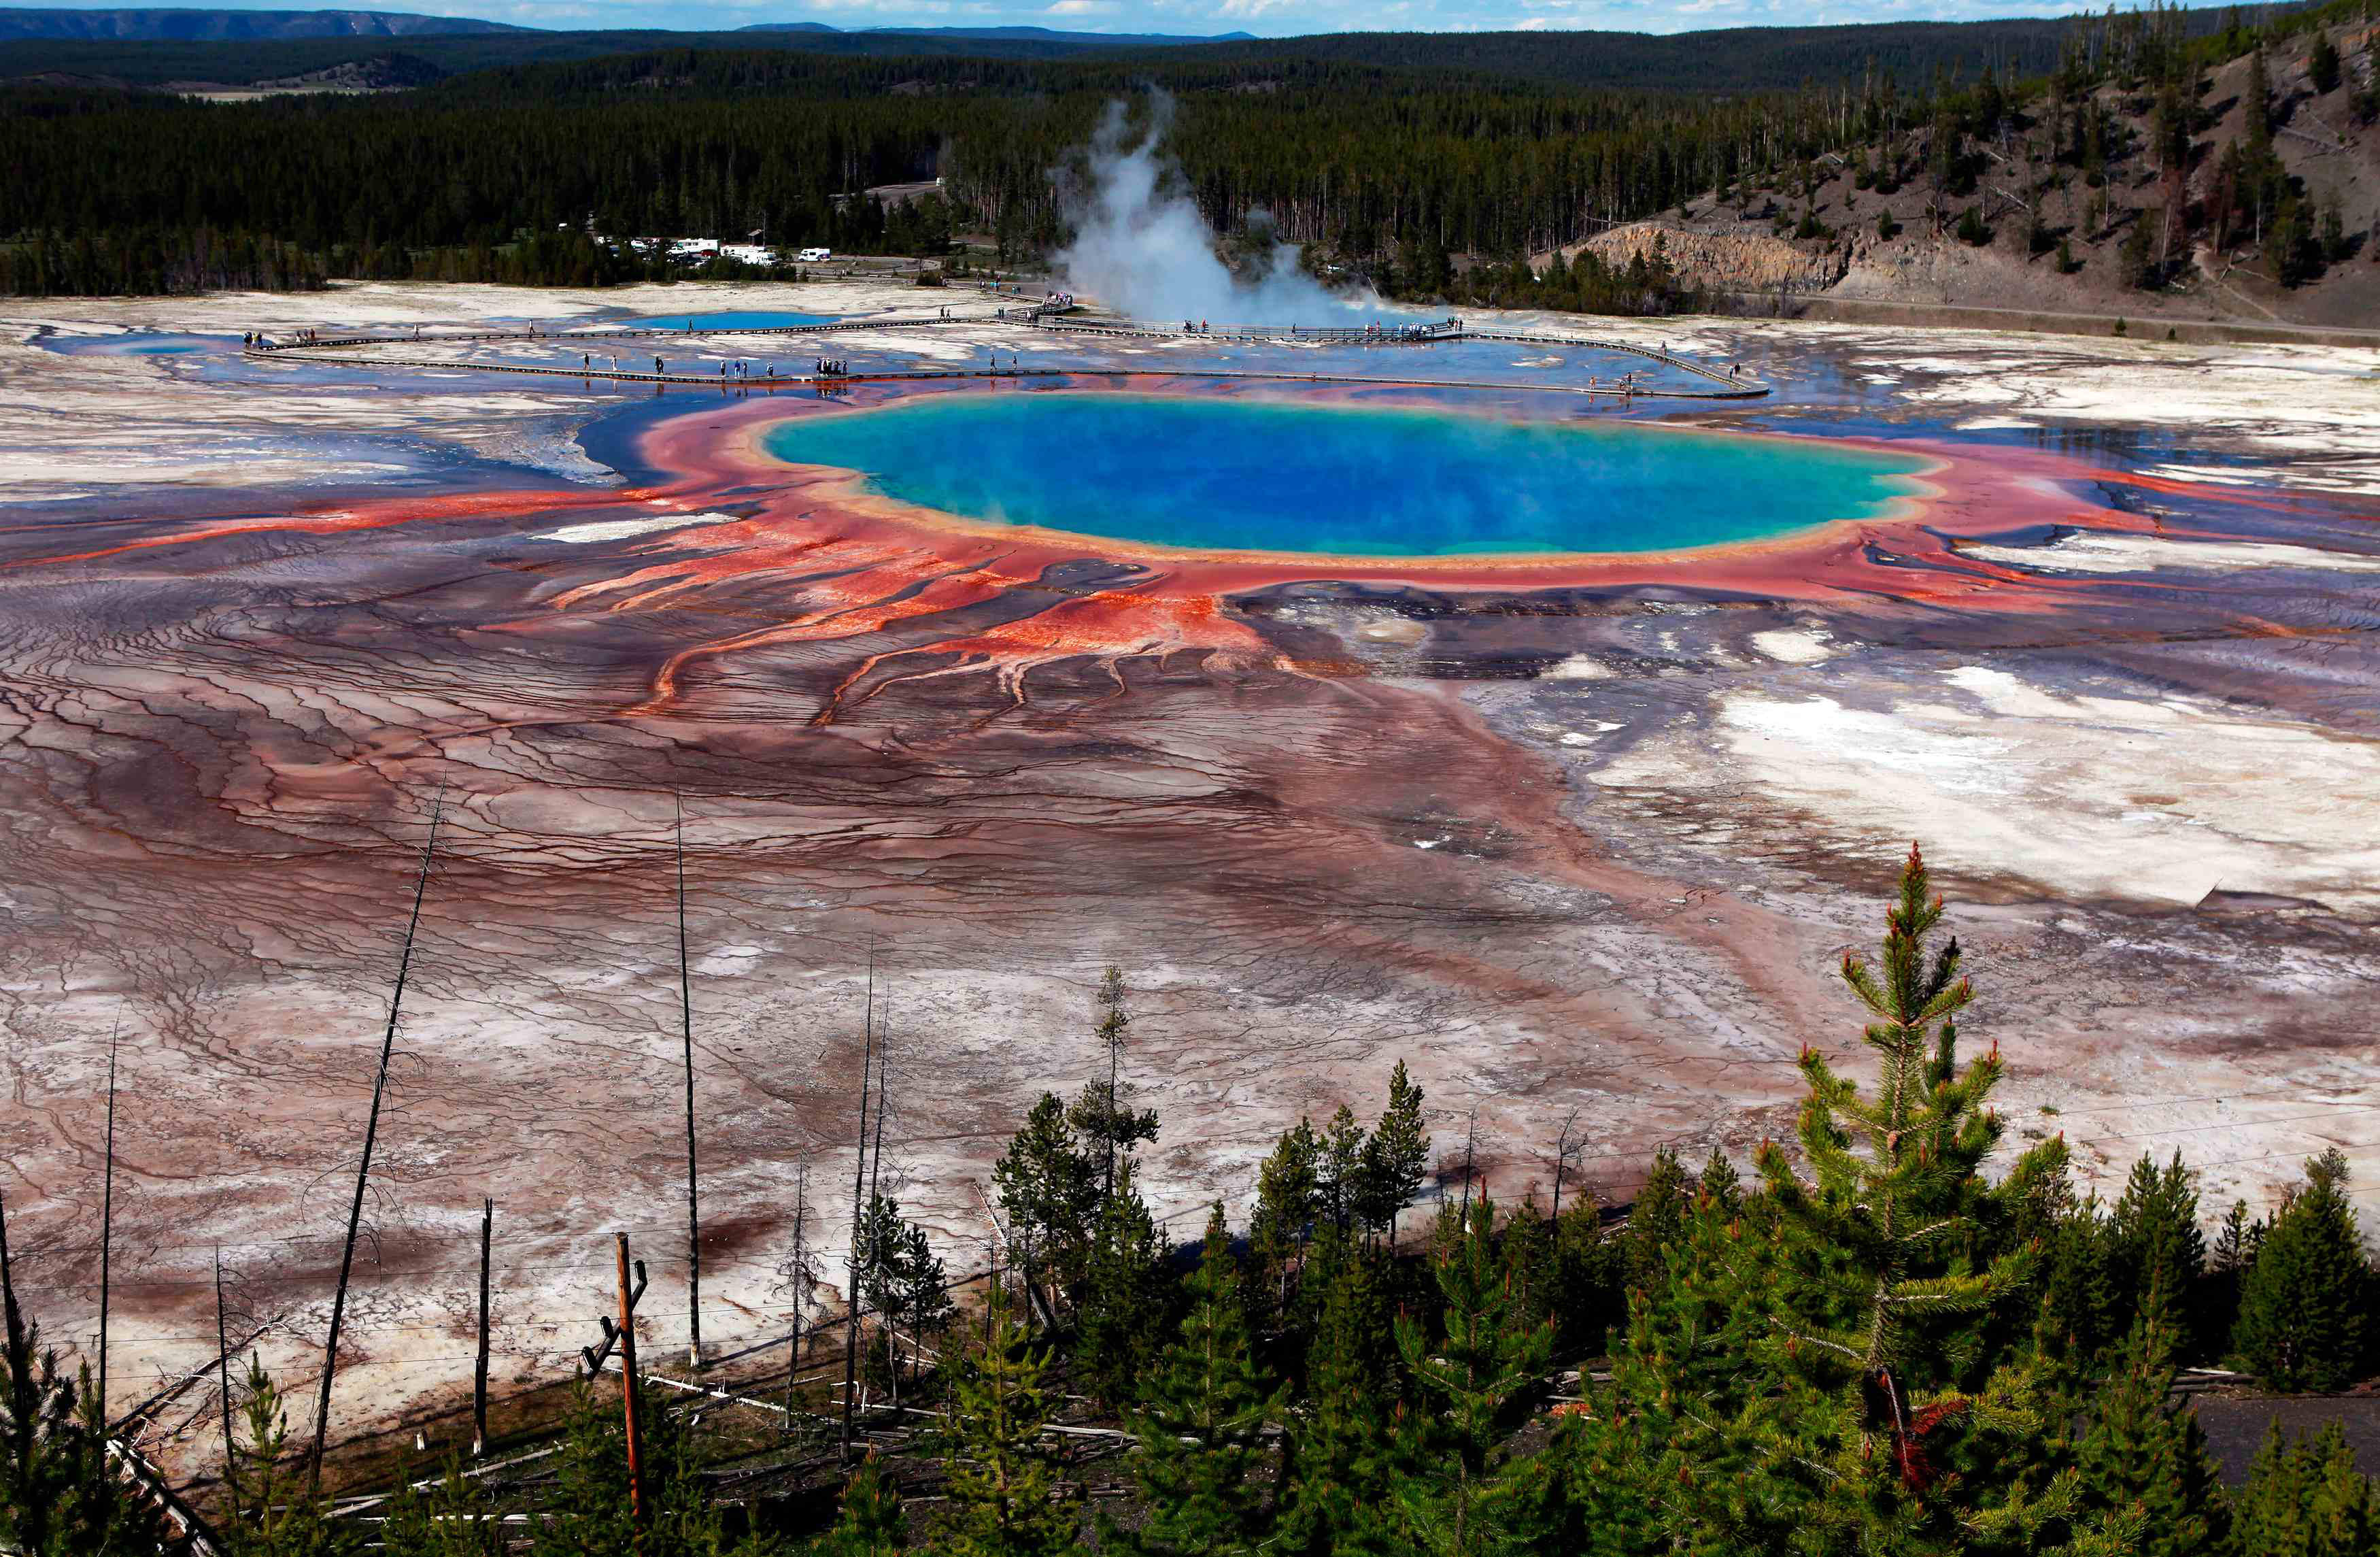 Man Who Died In Yellowstone National Park Hot Spring Was On Hot Pot